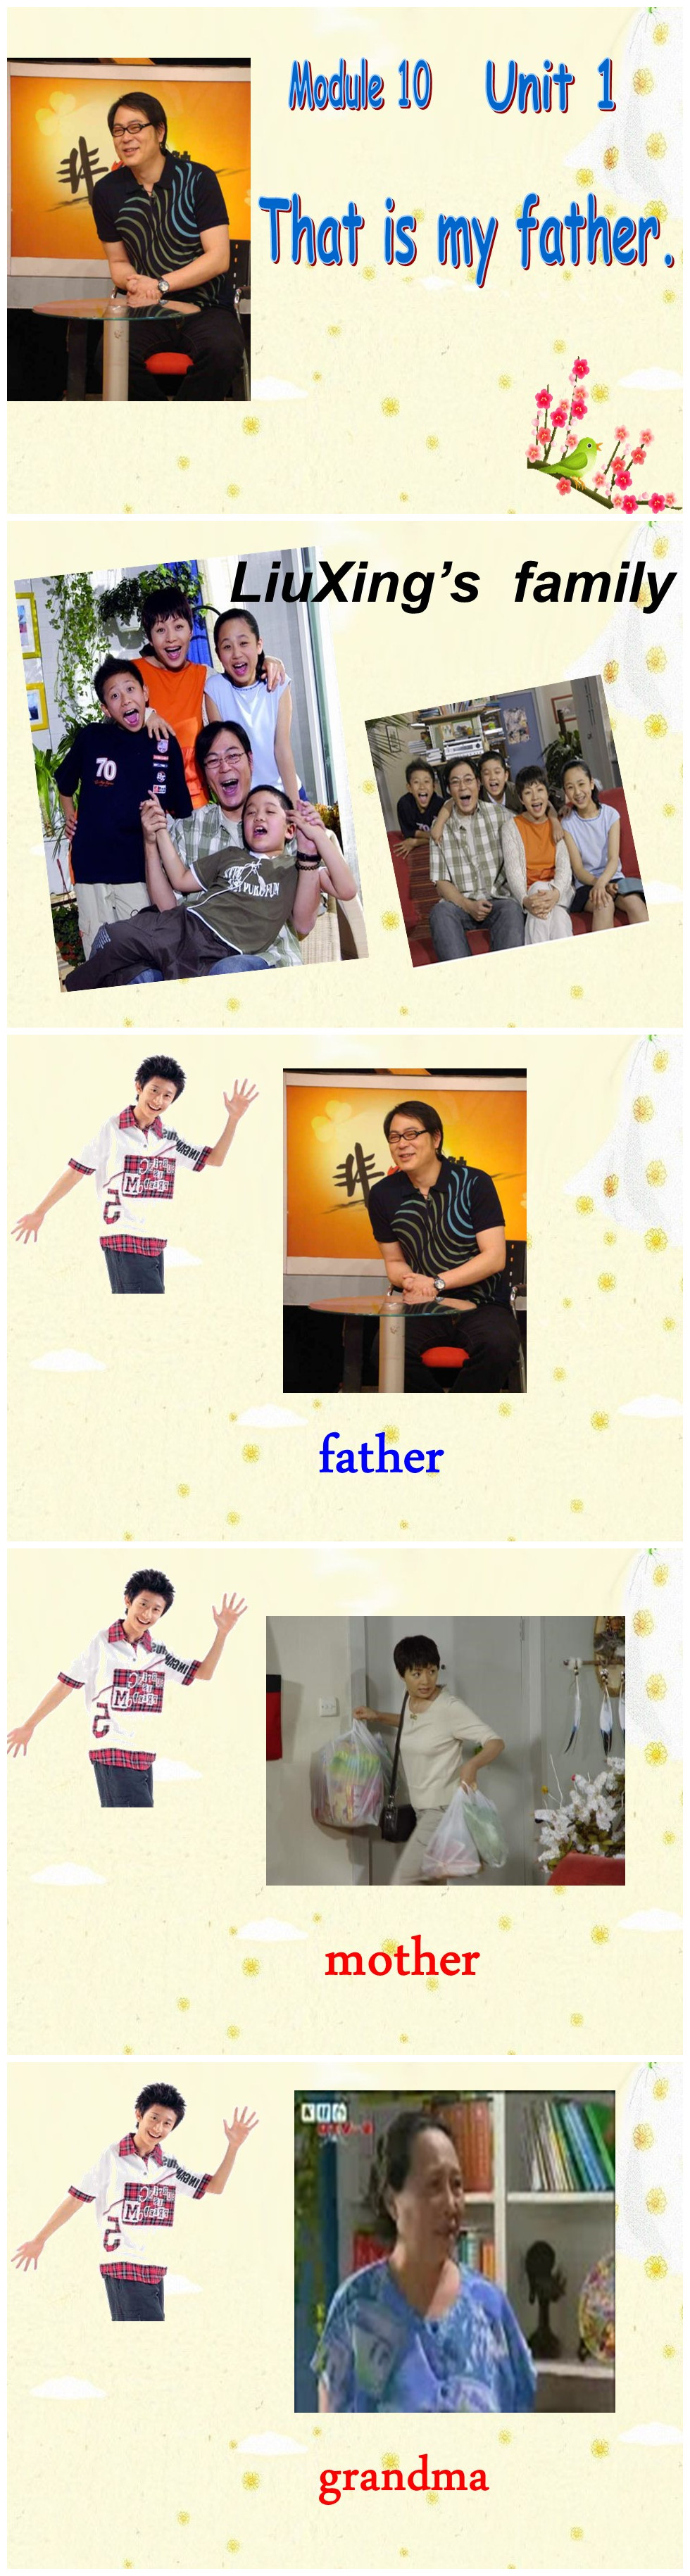 《That is my father》PPT课件2